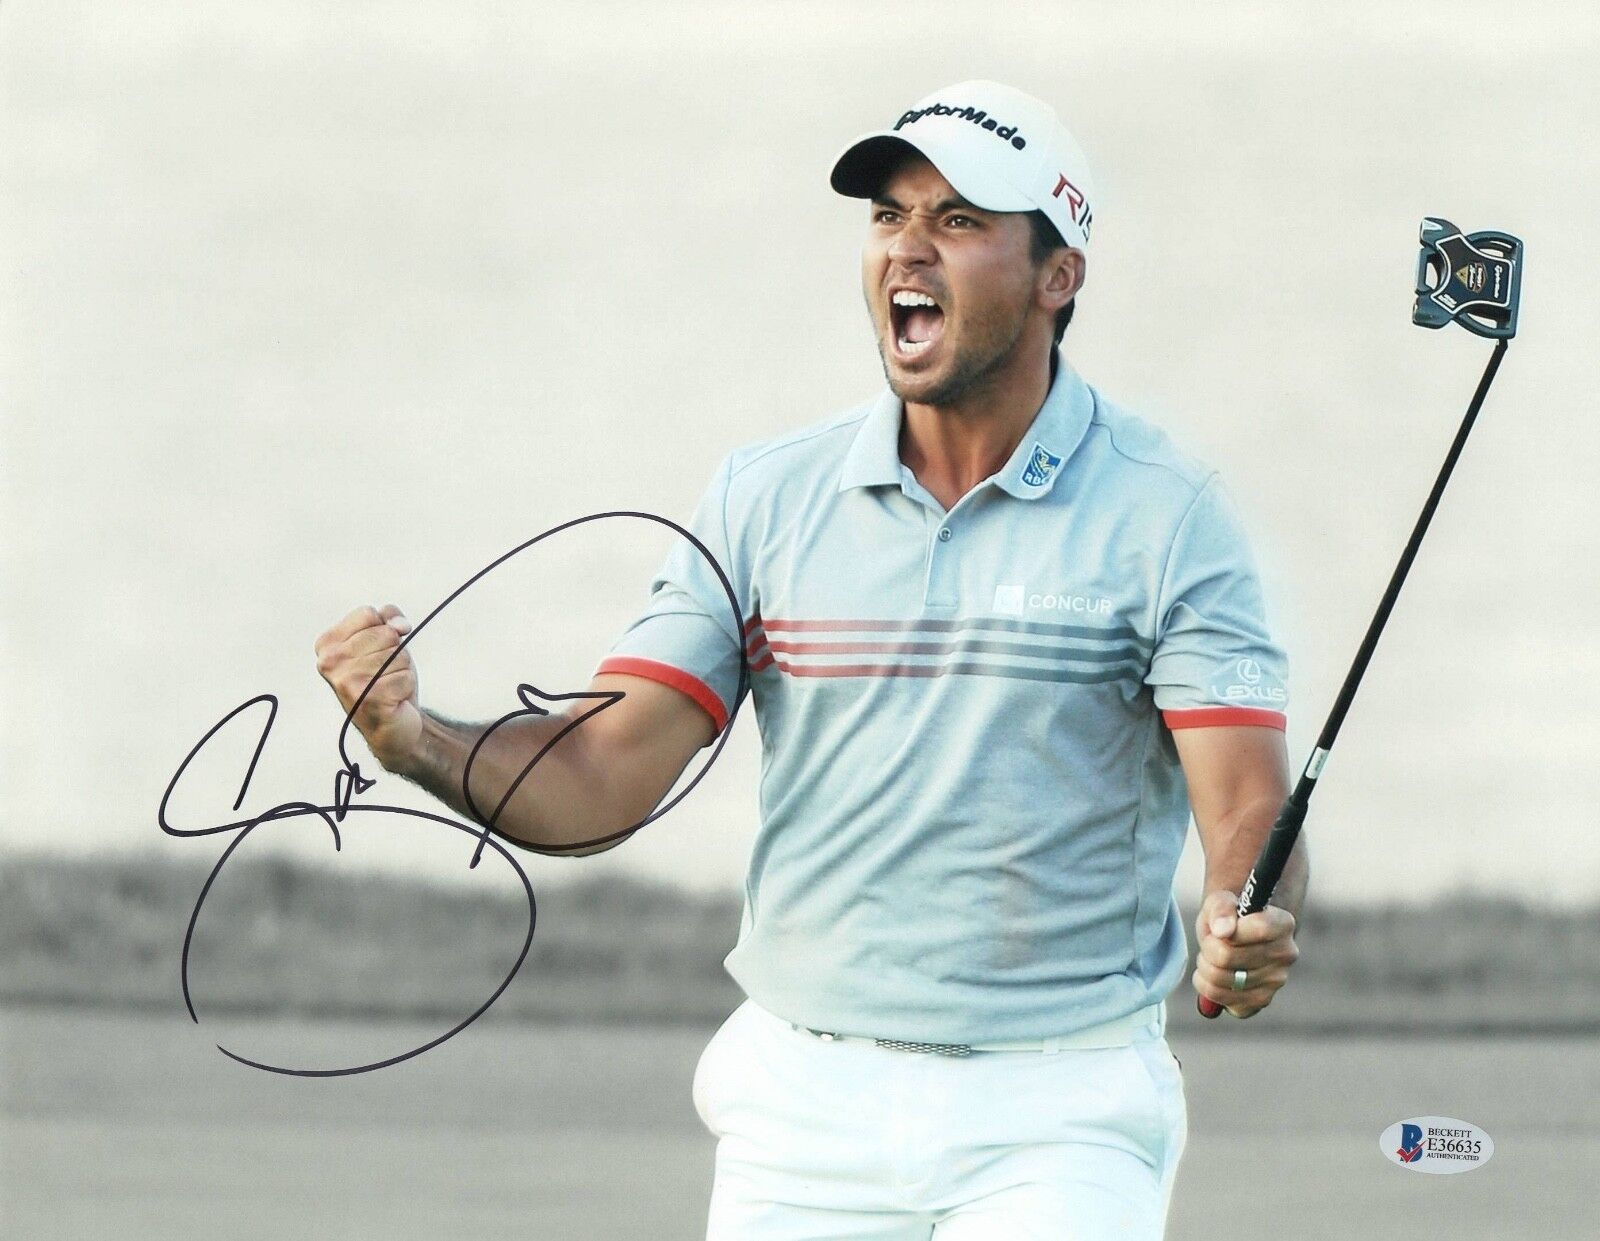 JASON DAY AUTOGRAPHED SIGNED 11X14 PHOTO PICTURE GOLF MASTERS BECKETT BAS COA